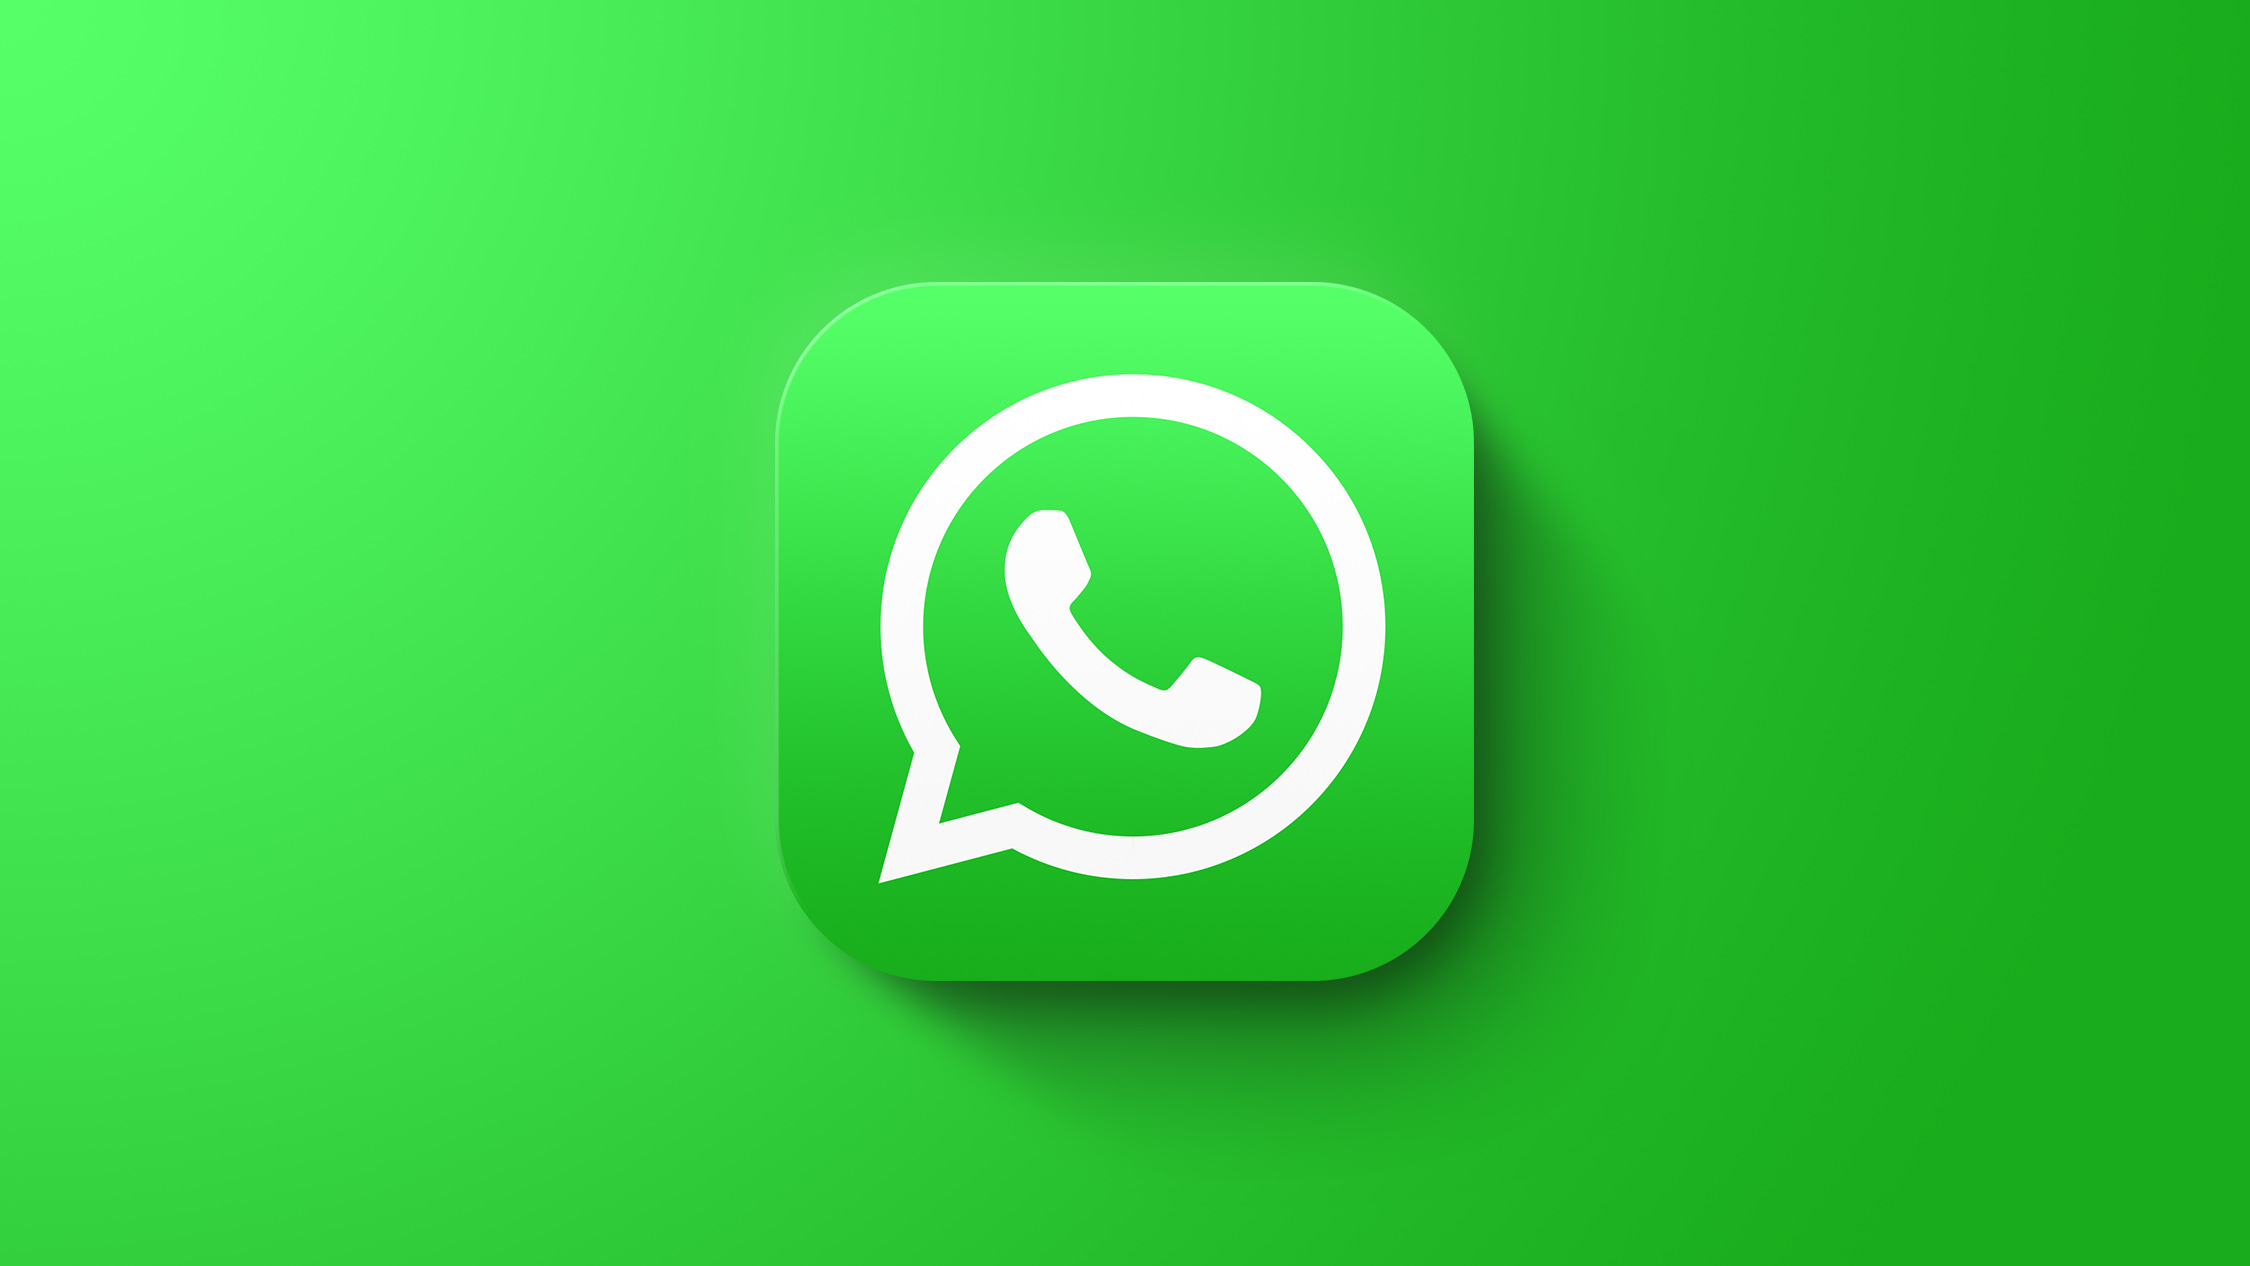 WhatsApp Testing ‘Expiring Groups’ Feature to Easily Leave Redundant Chats